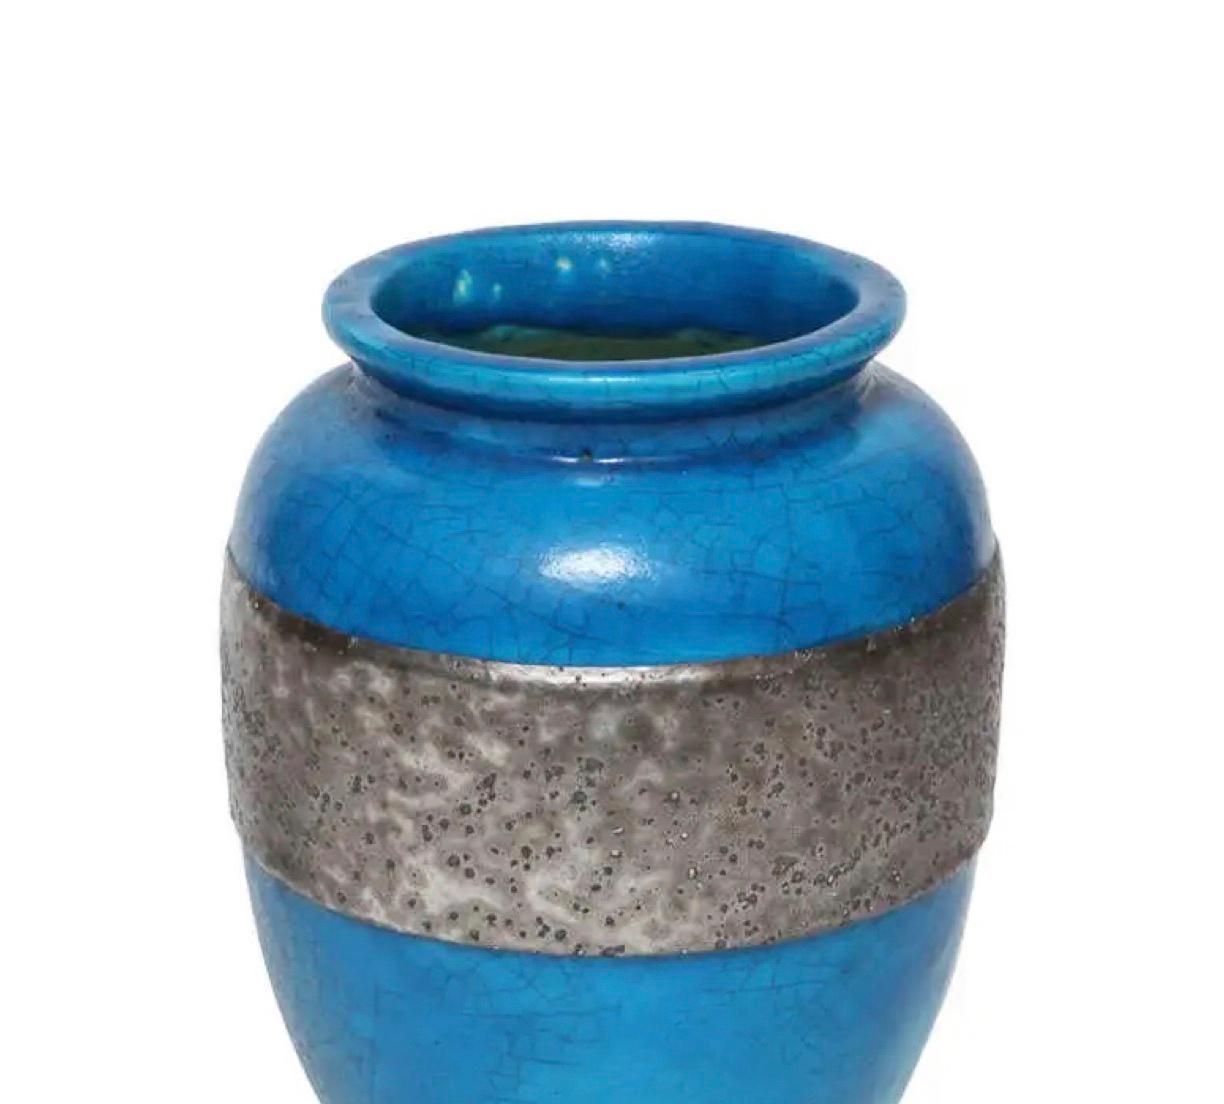 Raoul Lachenal large blue crackle glaze vase with silver pewter band made circa 1930's - 1940's. It's signed on base; 'Lachenal'.

Image 5: Photo of a Dynasty of French Ceramists - Edmond Lachenal (1855 - 1948) in the center, Raoul Pierre Lachenal